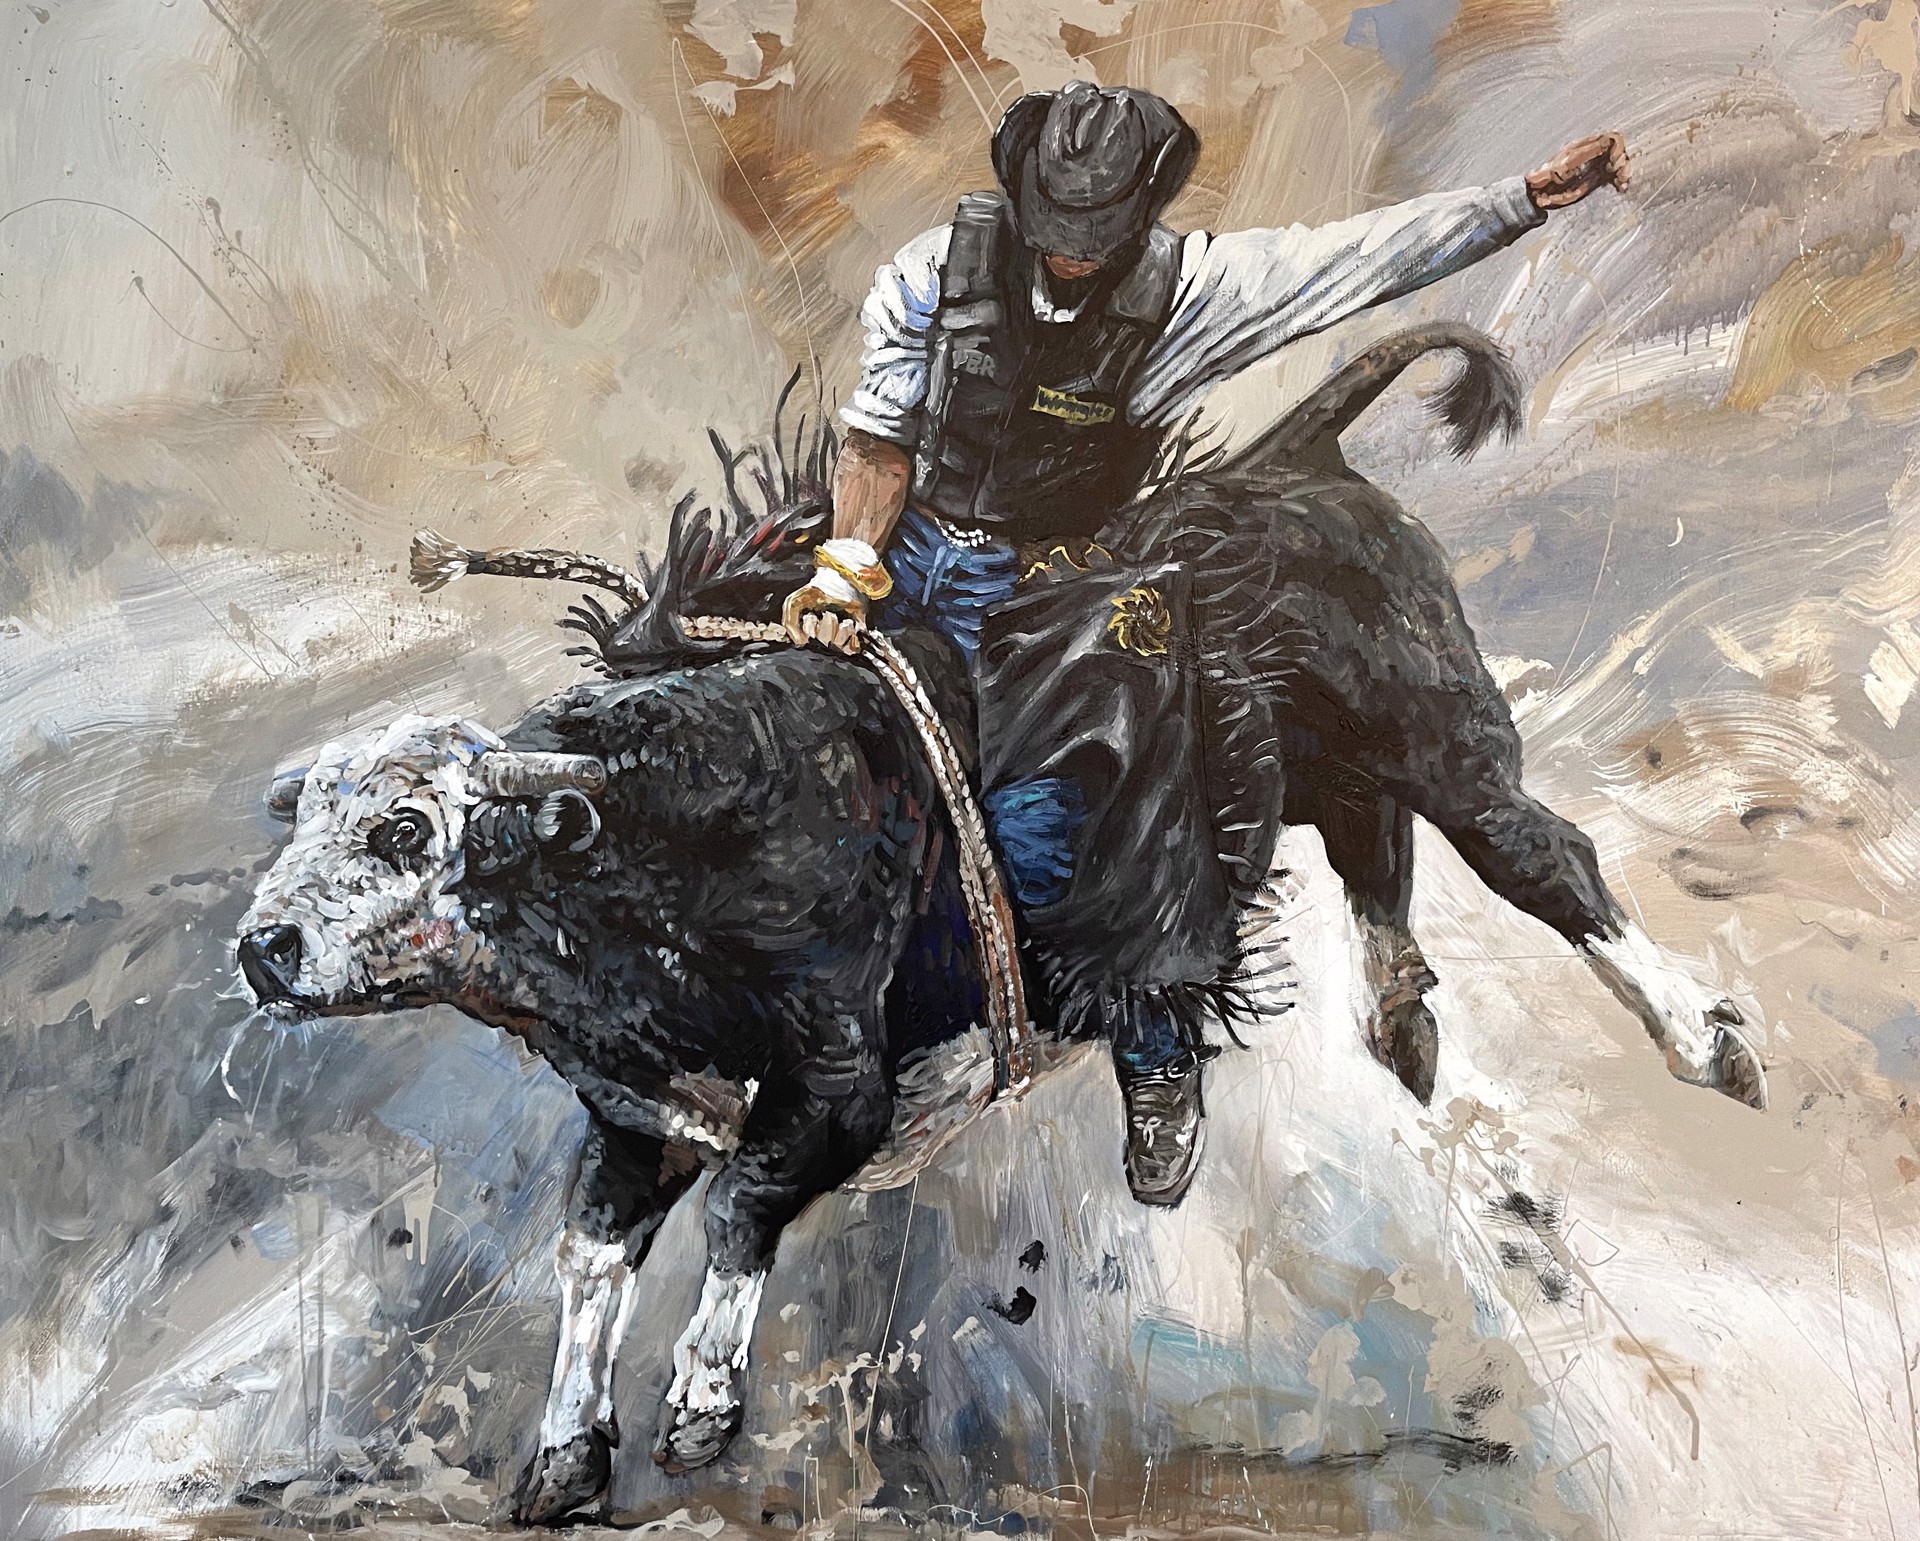 Rodeo Rider by Jared Knox